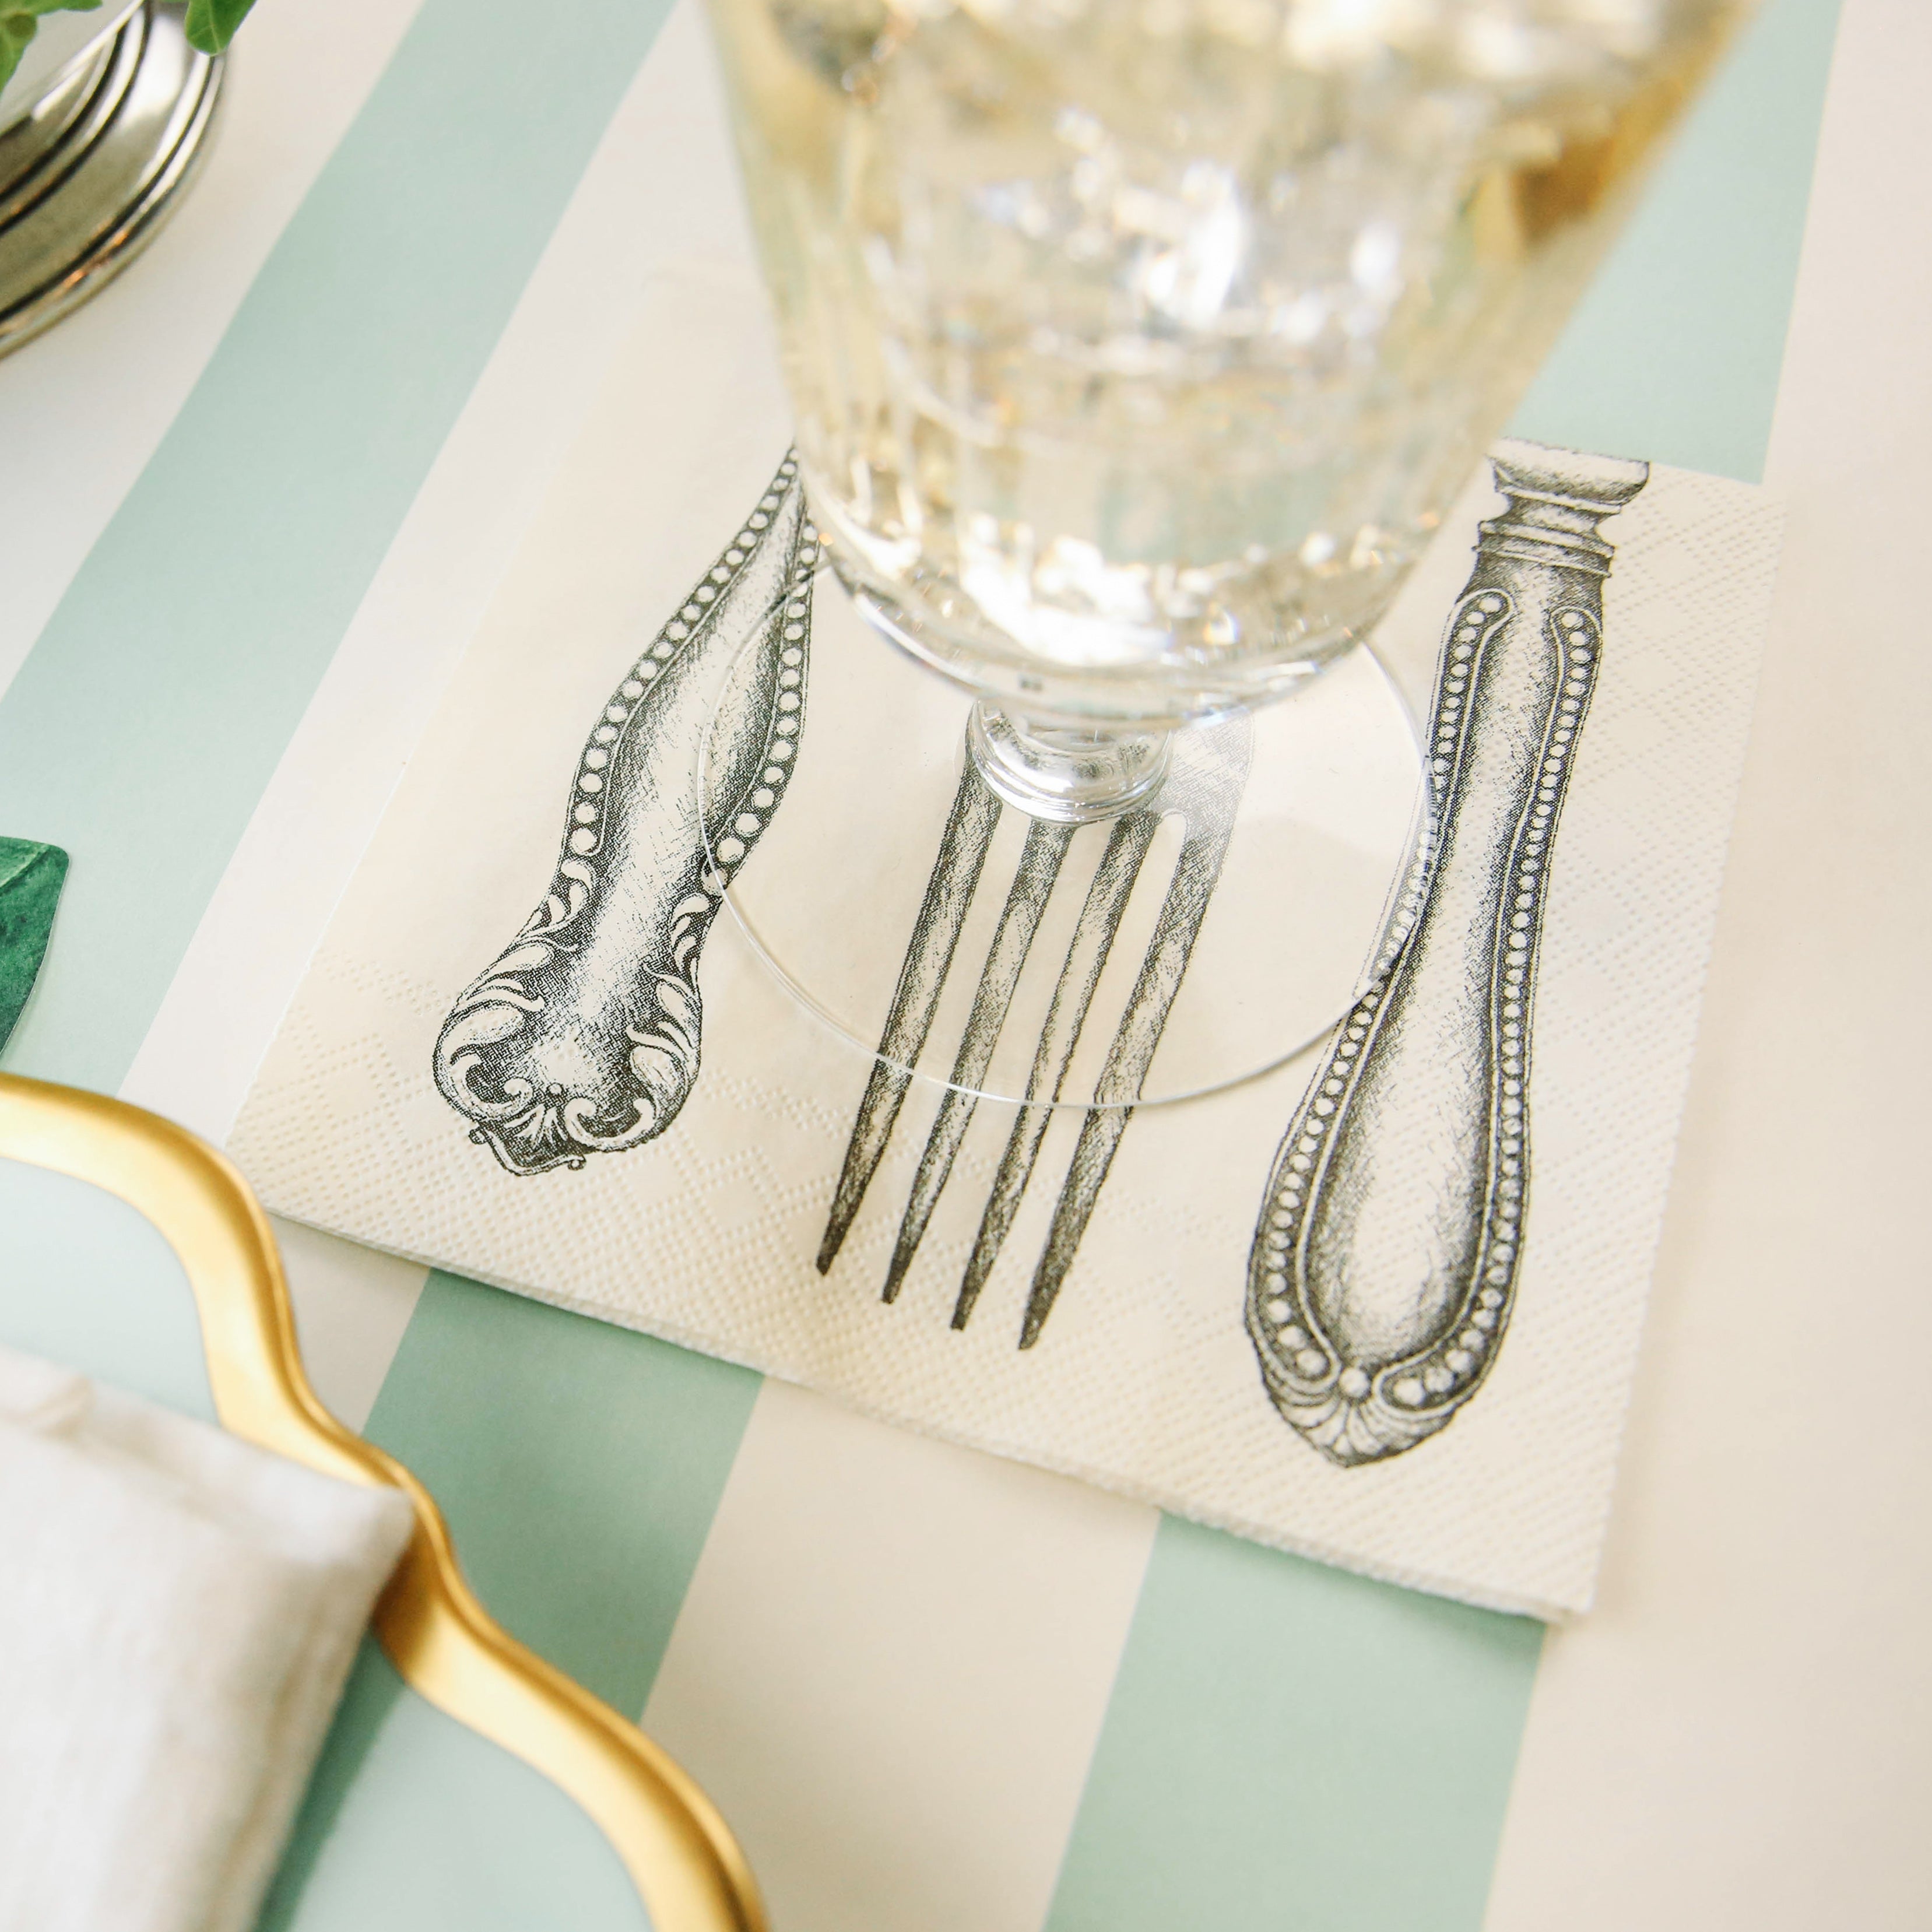 A Classic Cutlery Napkin by Hester &amp; Cook with a fork and knife on it, perfect for a party table setting.